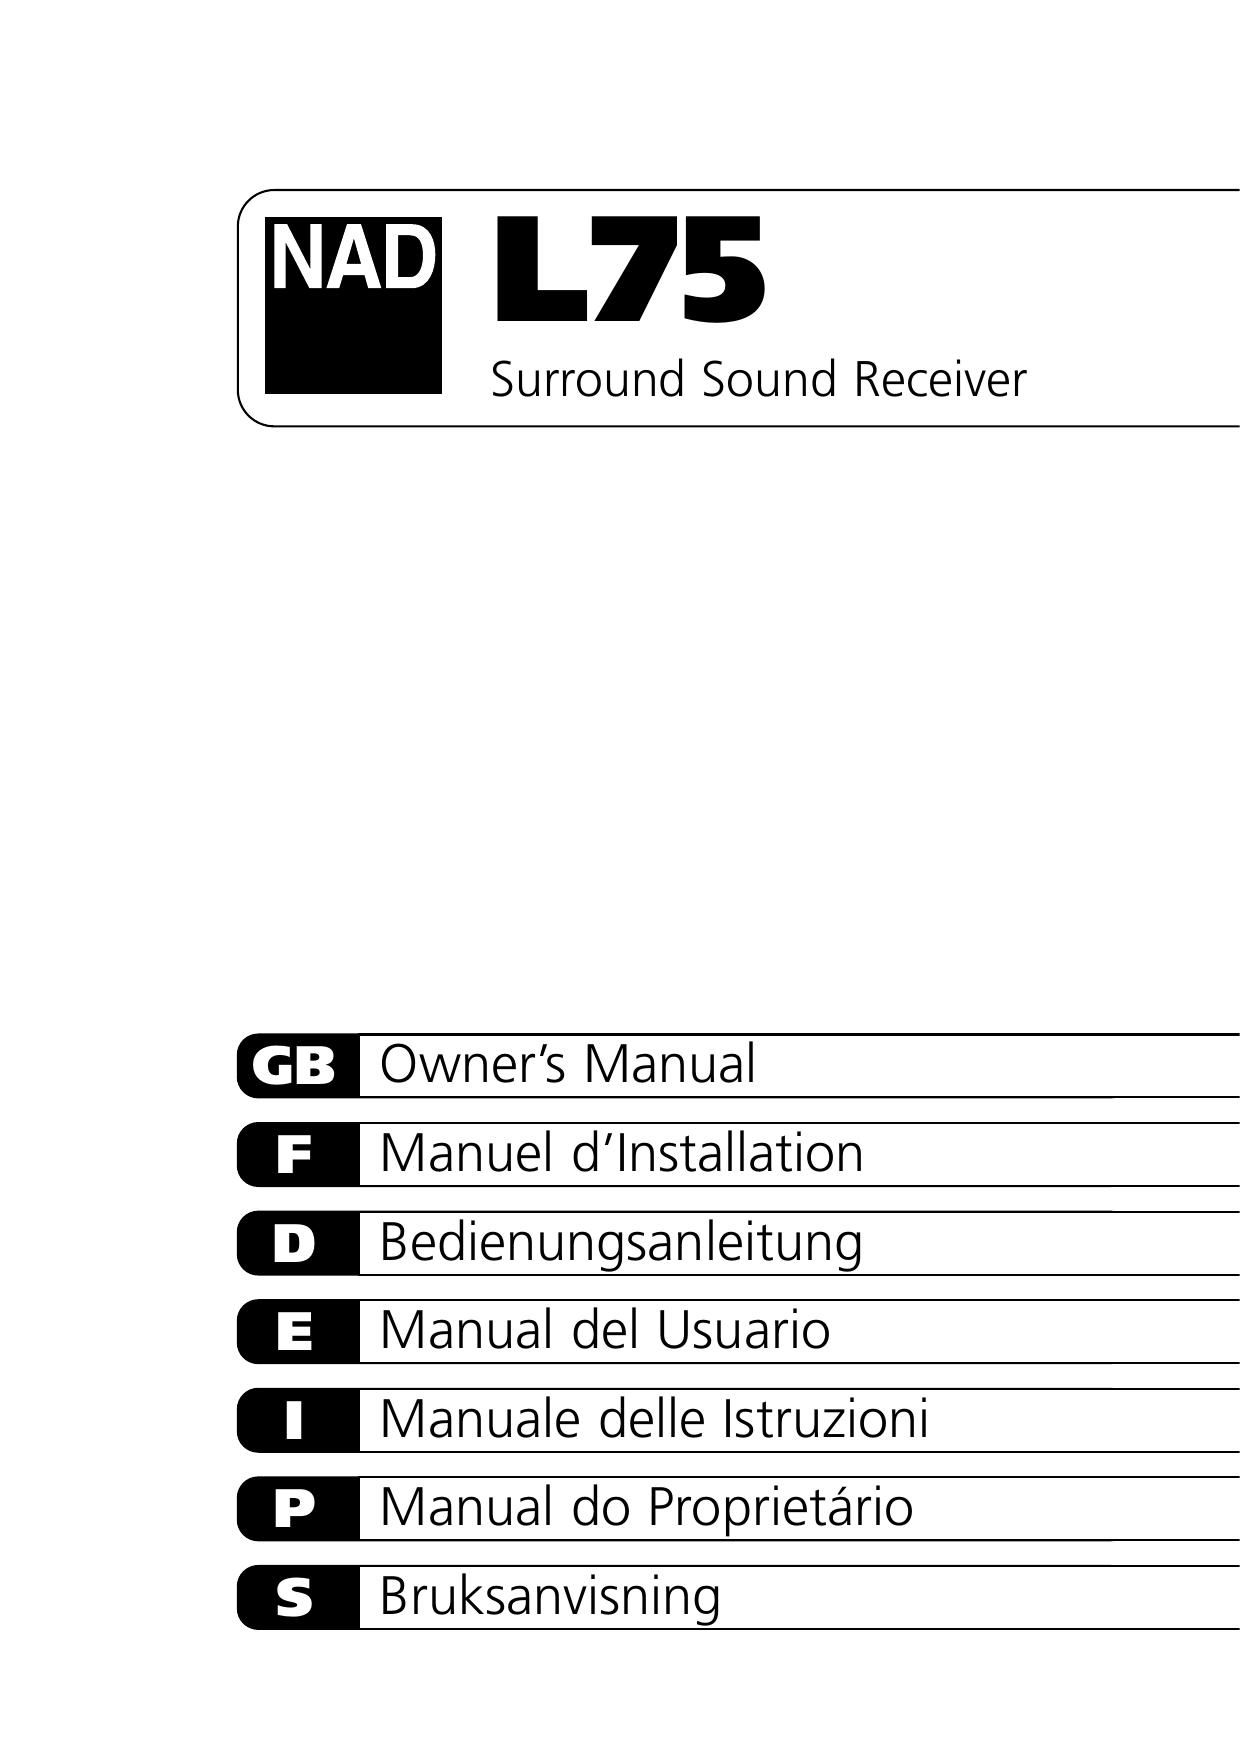 Nad L 75 Owners Manual